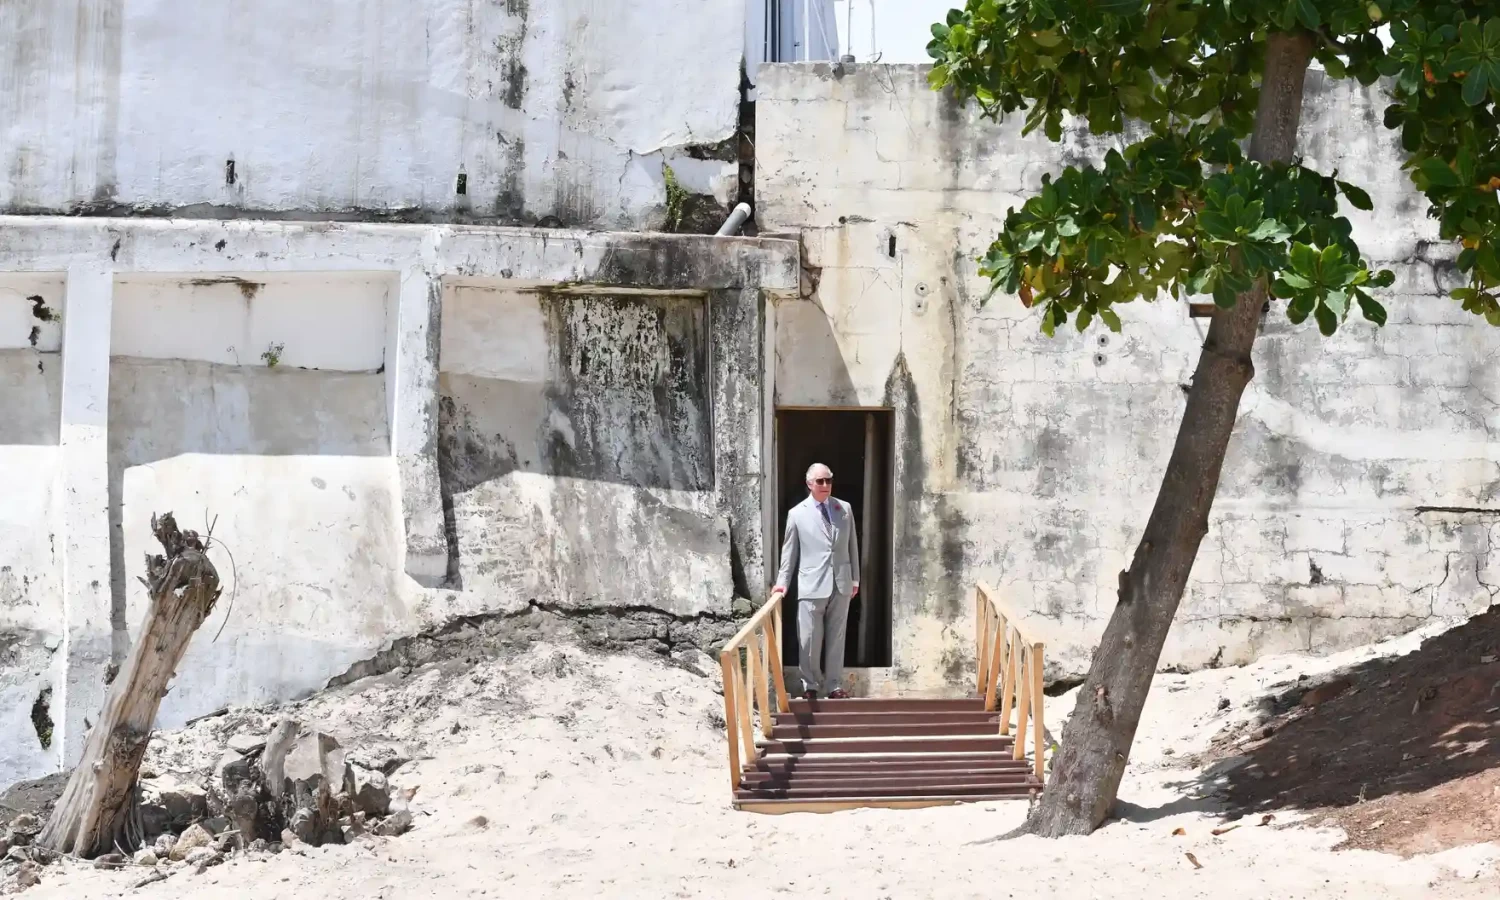 Charles visits Christainborg Castle in Osu, which operated as a slave trade fort. Photograph: Tim Rooke/Rex/Shutterstock